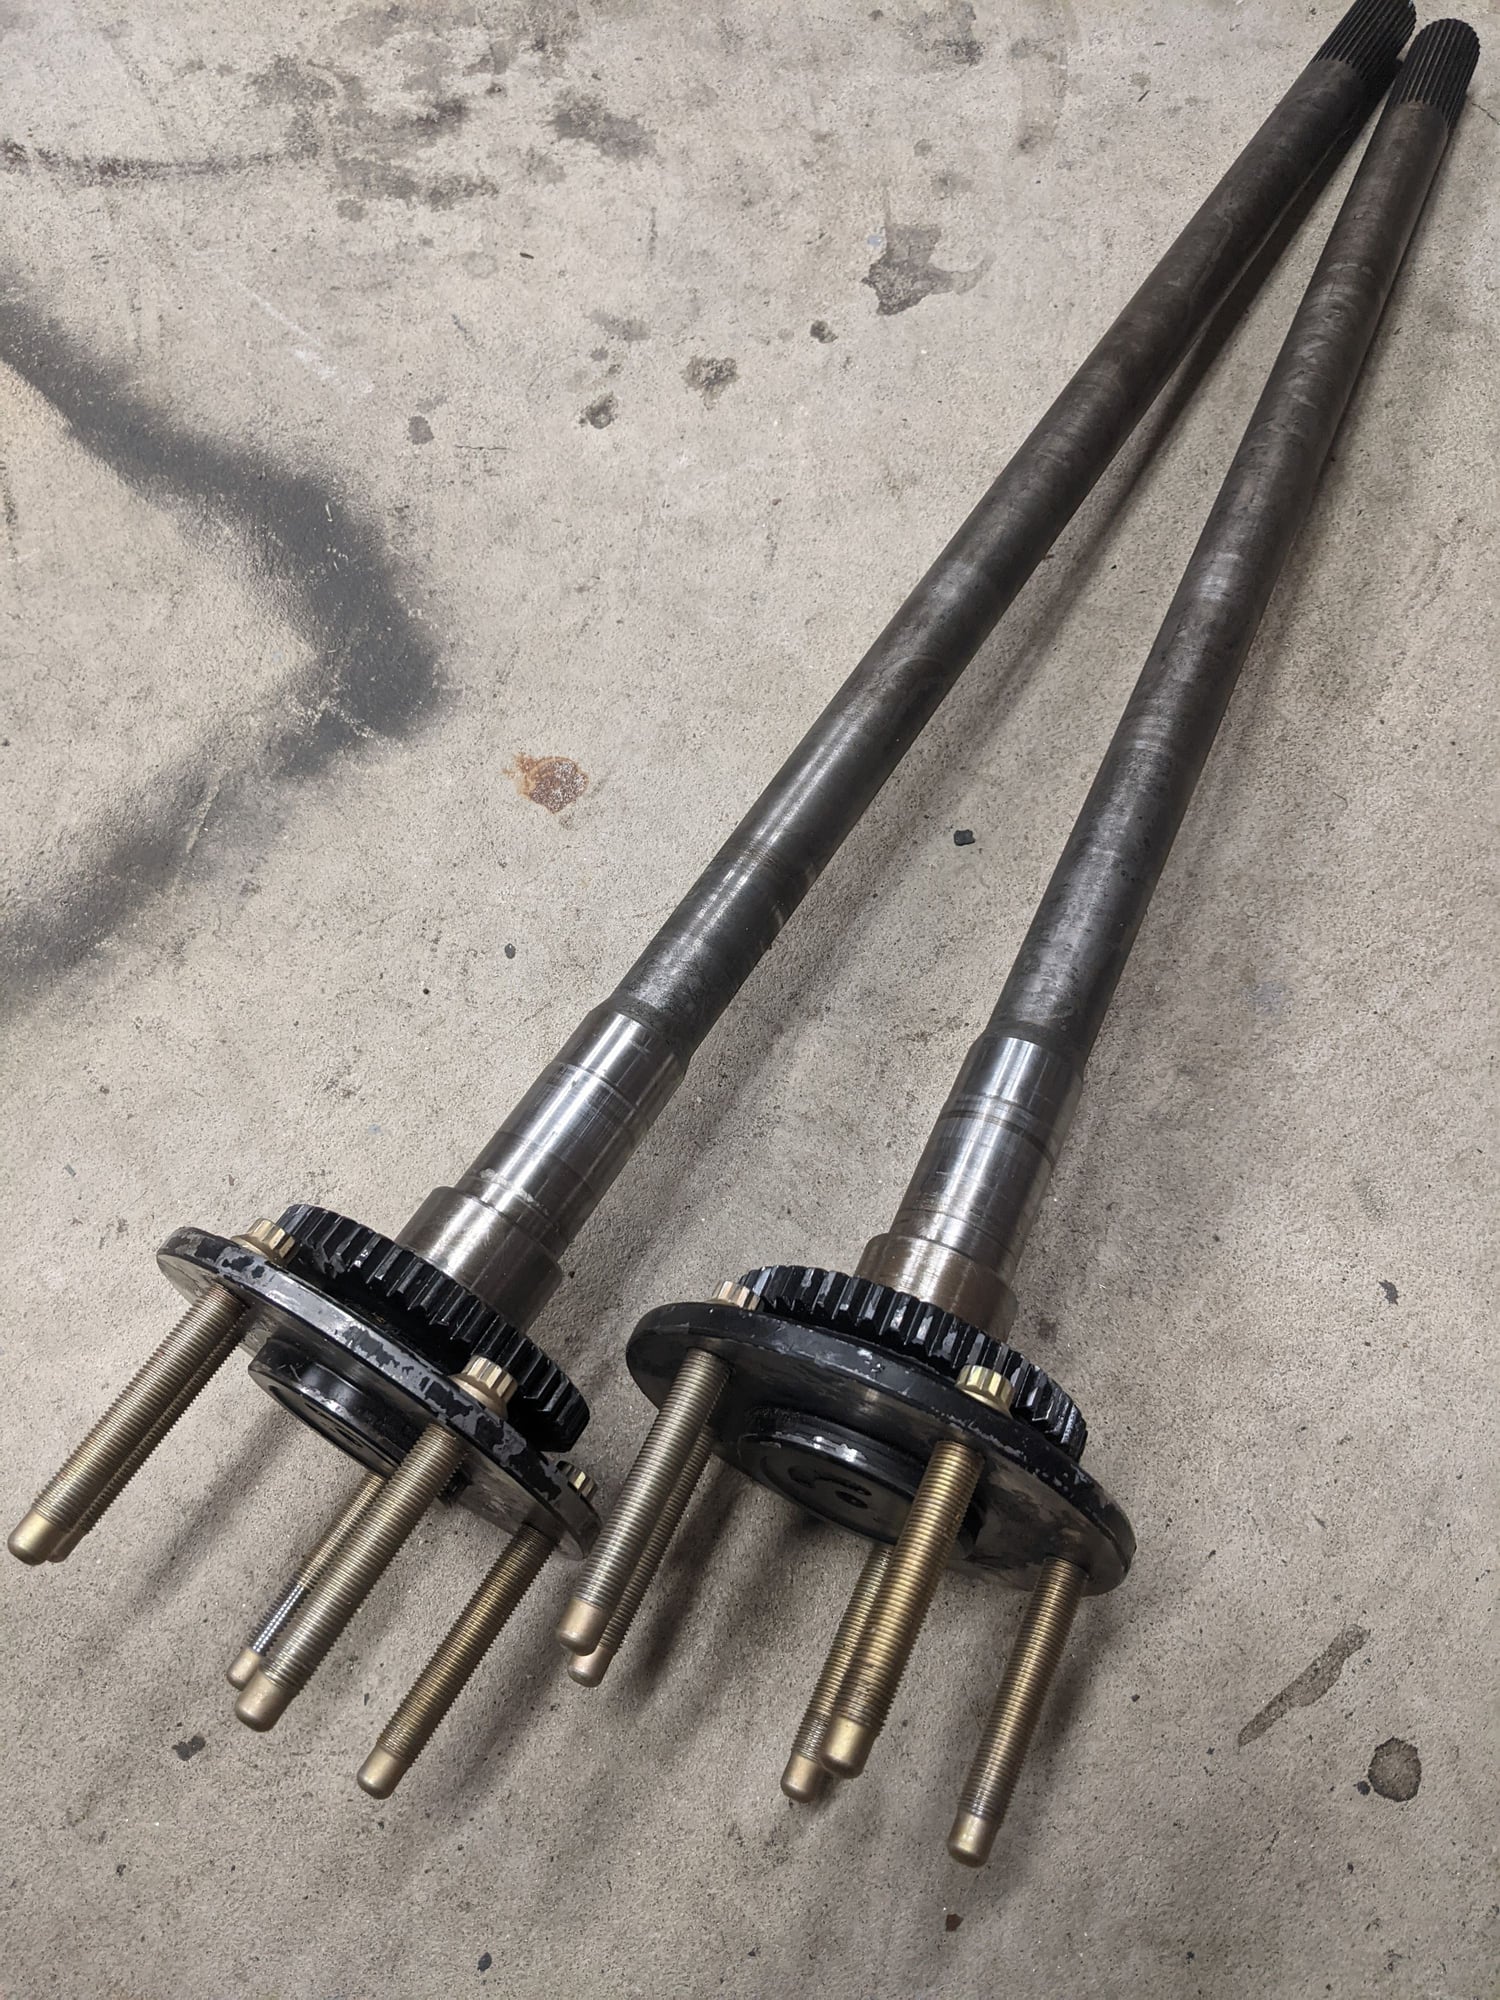 Steering/Suspension - Moser axles 4th gen Fbody Ford 9 inch with ABS rings, ARP studs - Used - 0  All Models - Virginia Beach, VA 23456, United States